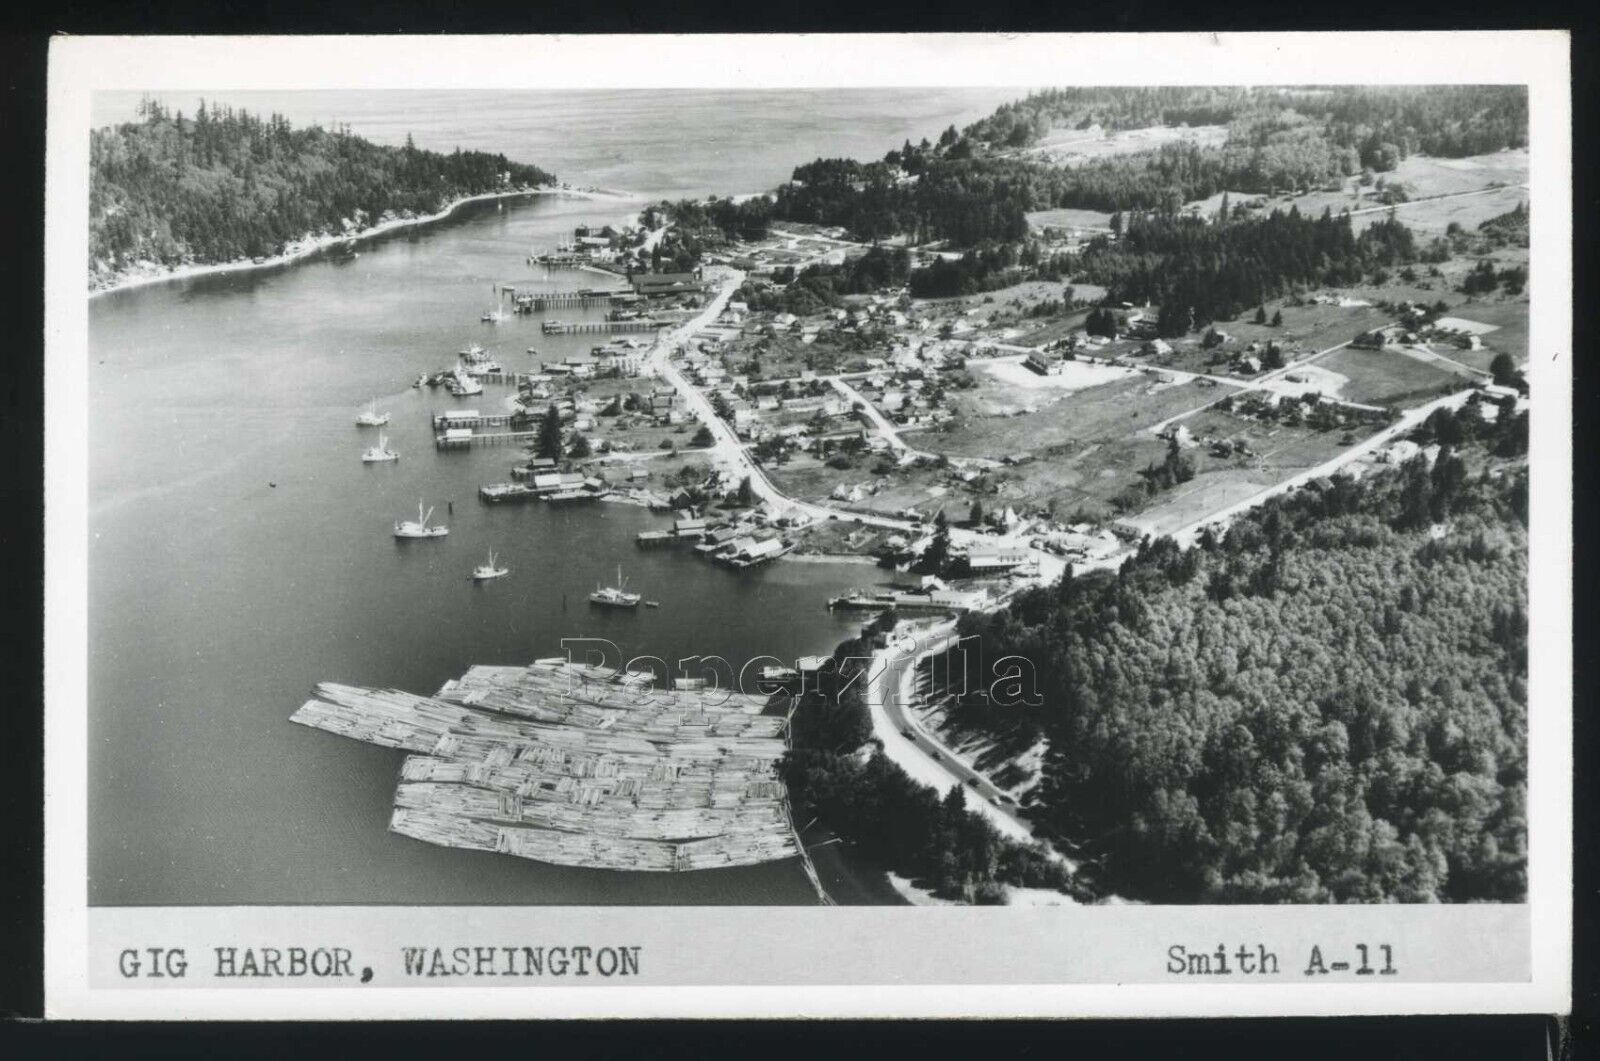 WA Gig Harbor RPPC 1950\'s AERIAL VIEW of HARBOR & TOWN Pierce Co. by Smith A-11